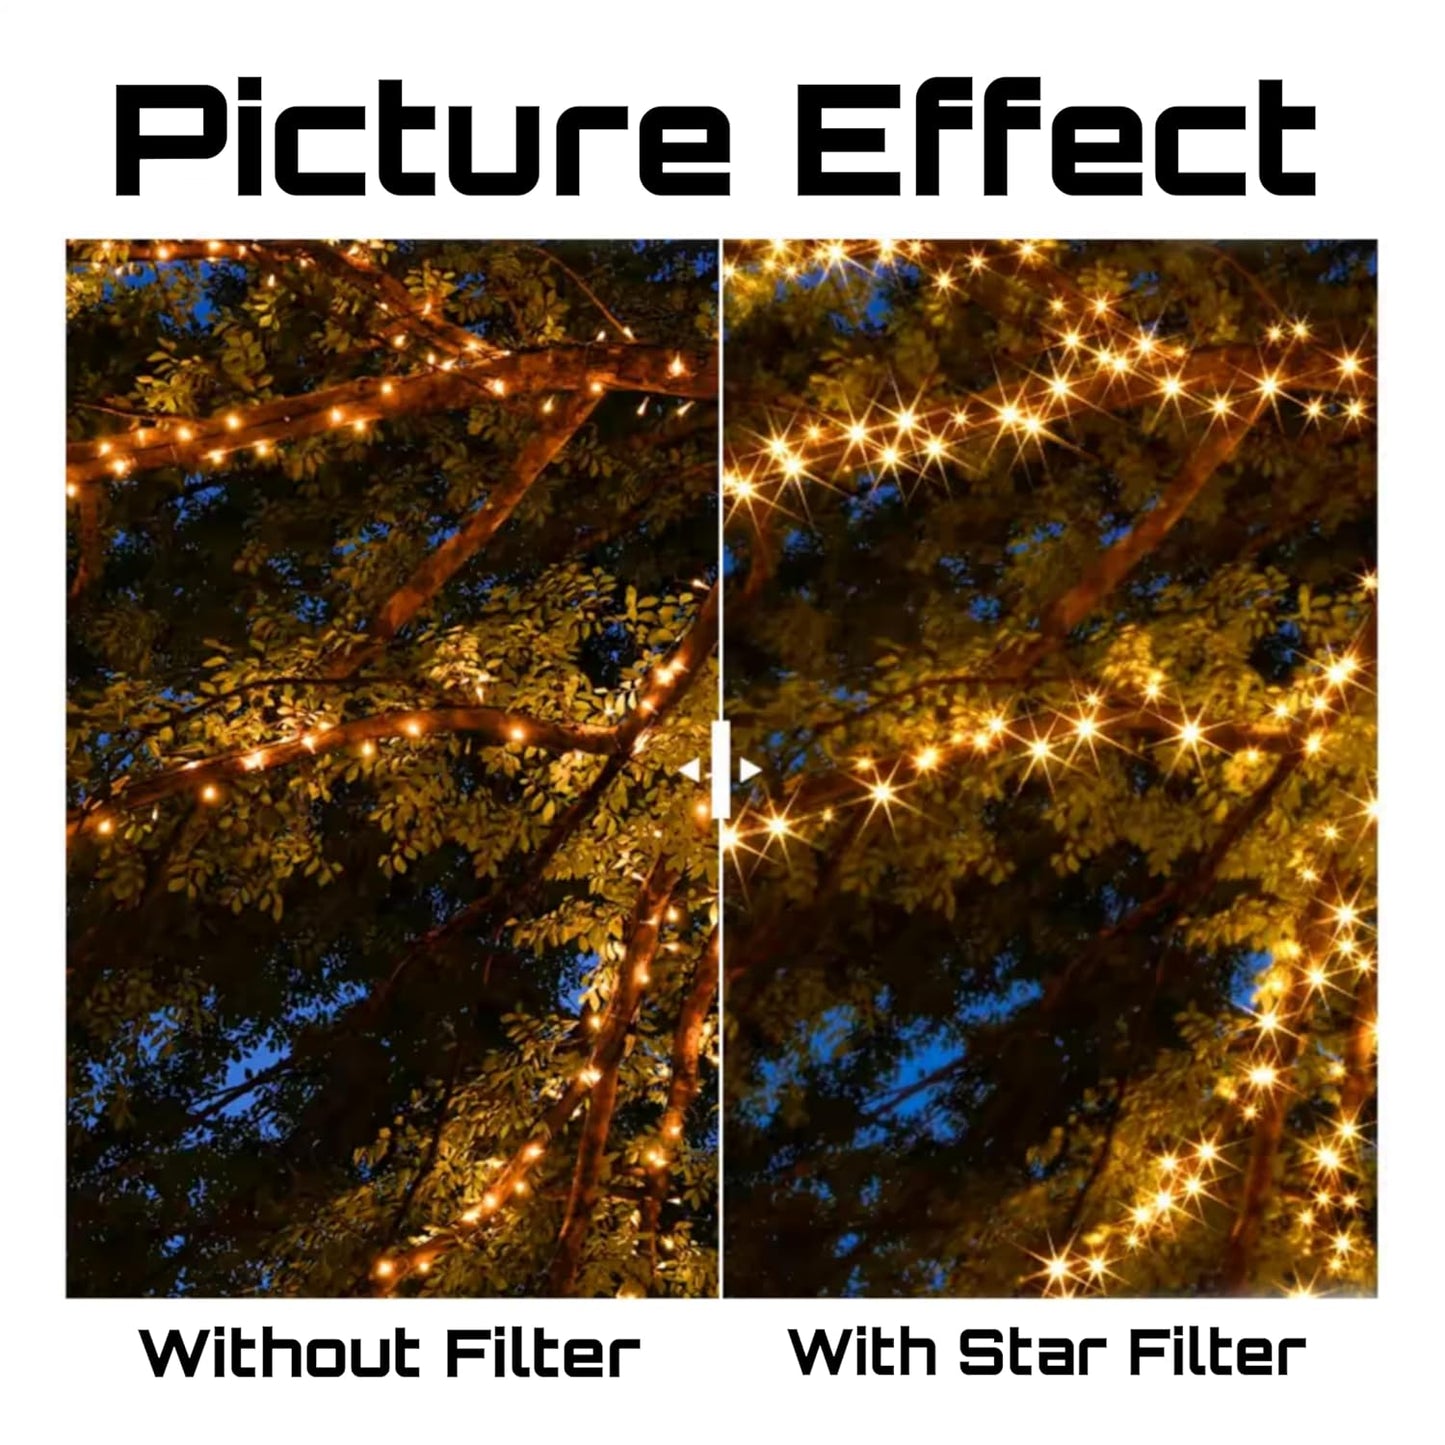 GetZget® Star Filters Compatible with oneplus12, iPhone 14/15 pro & pro max, Xiaomi 14 Mobile Cover, DSLR Camera (58mm, Star No.6 Filter)